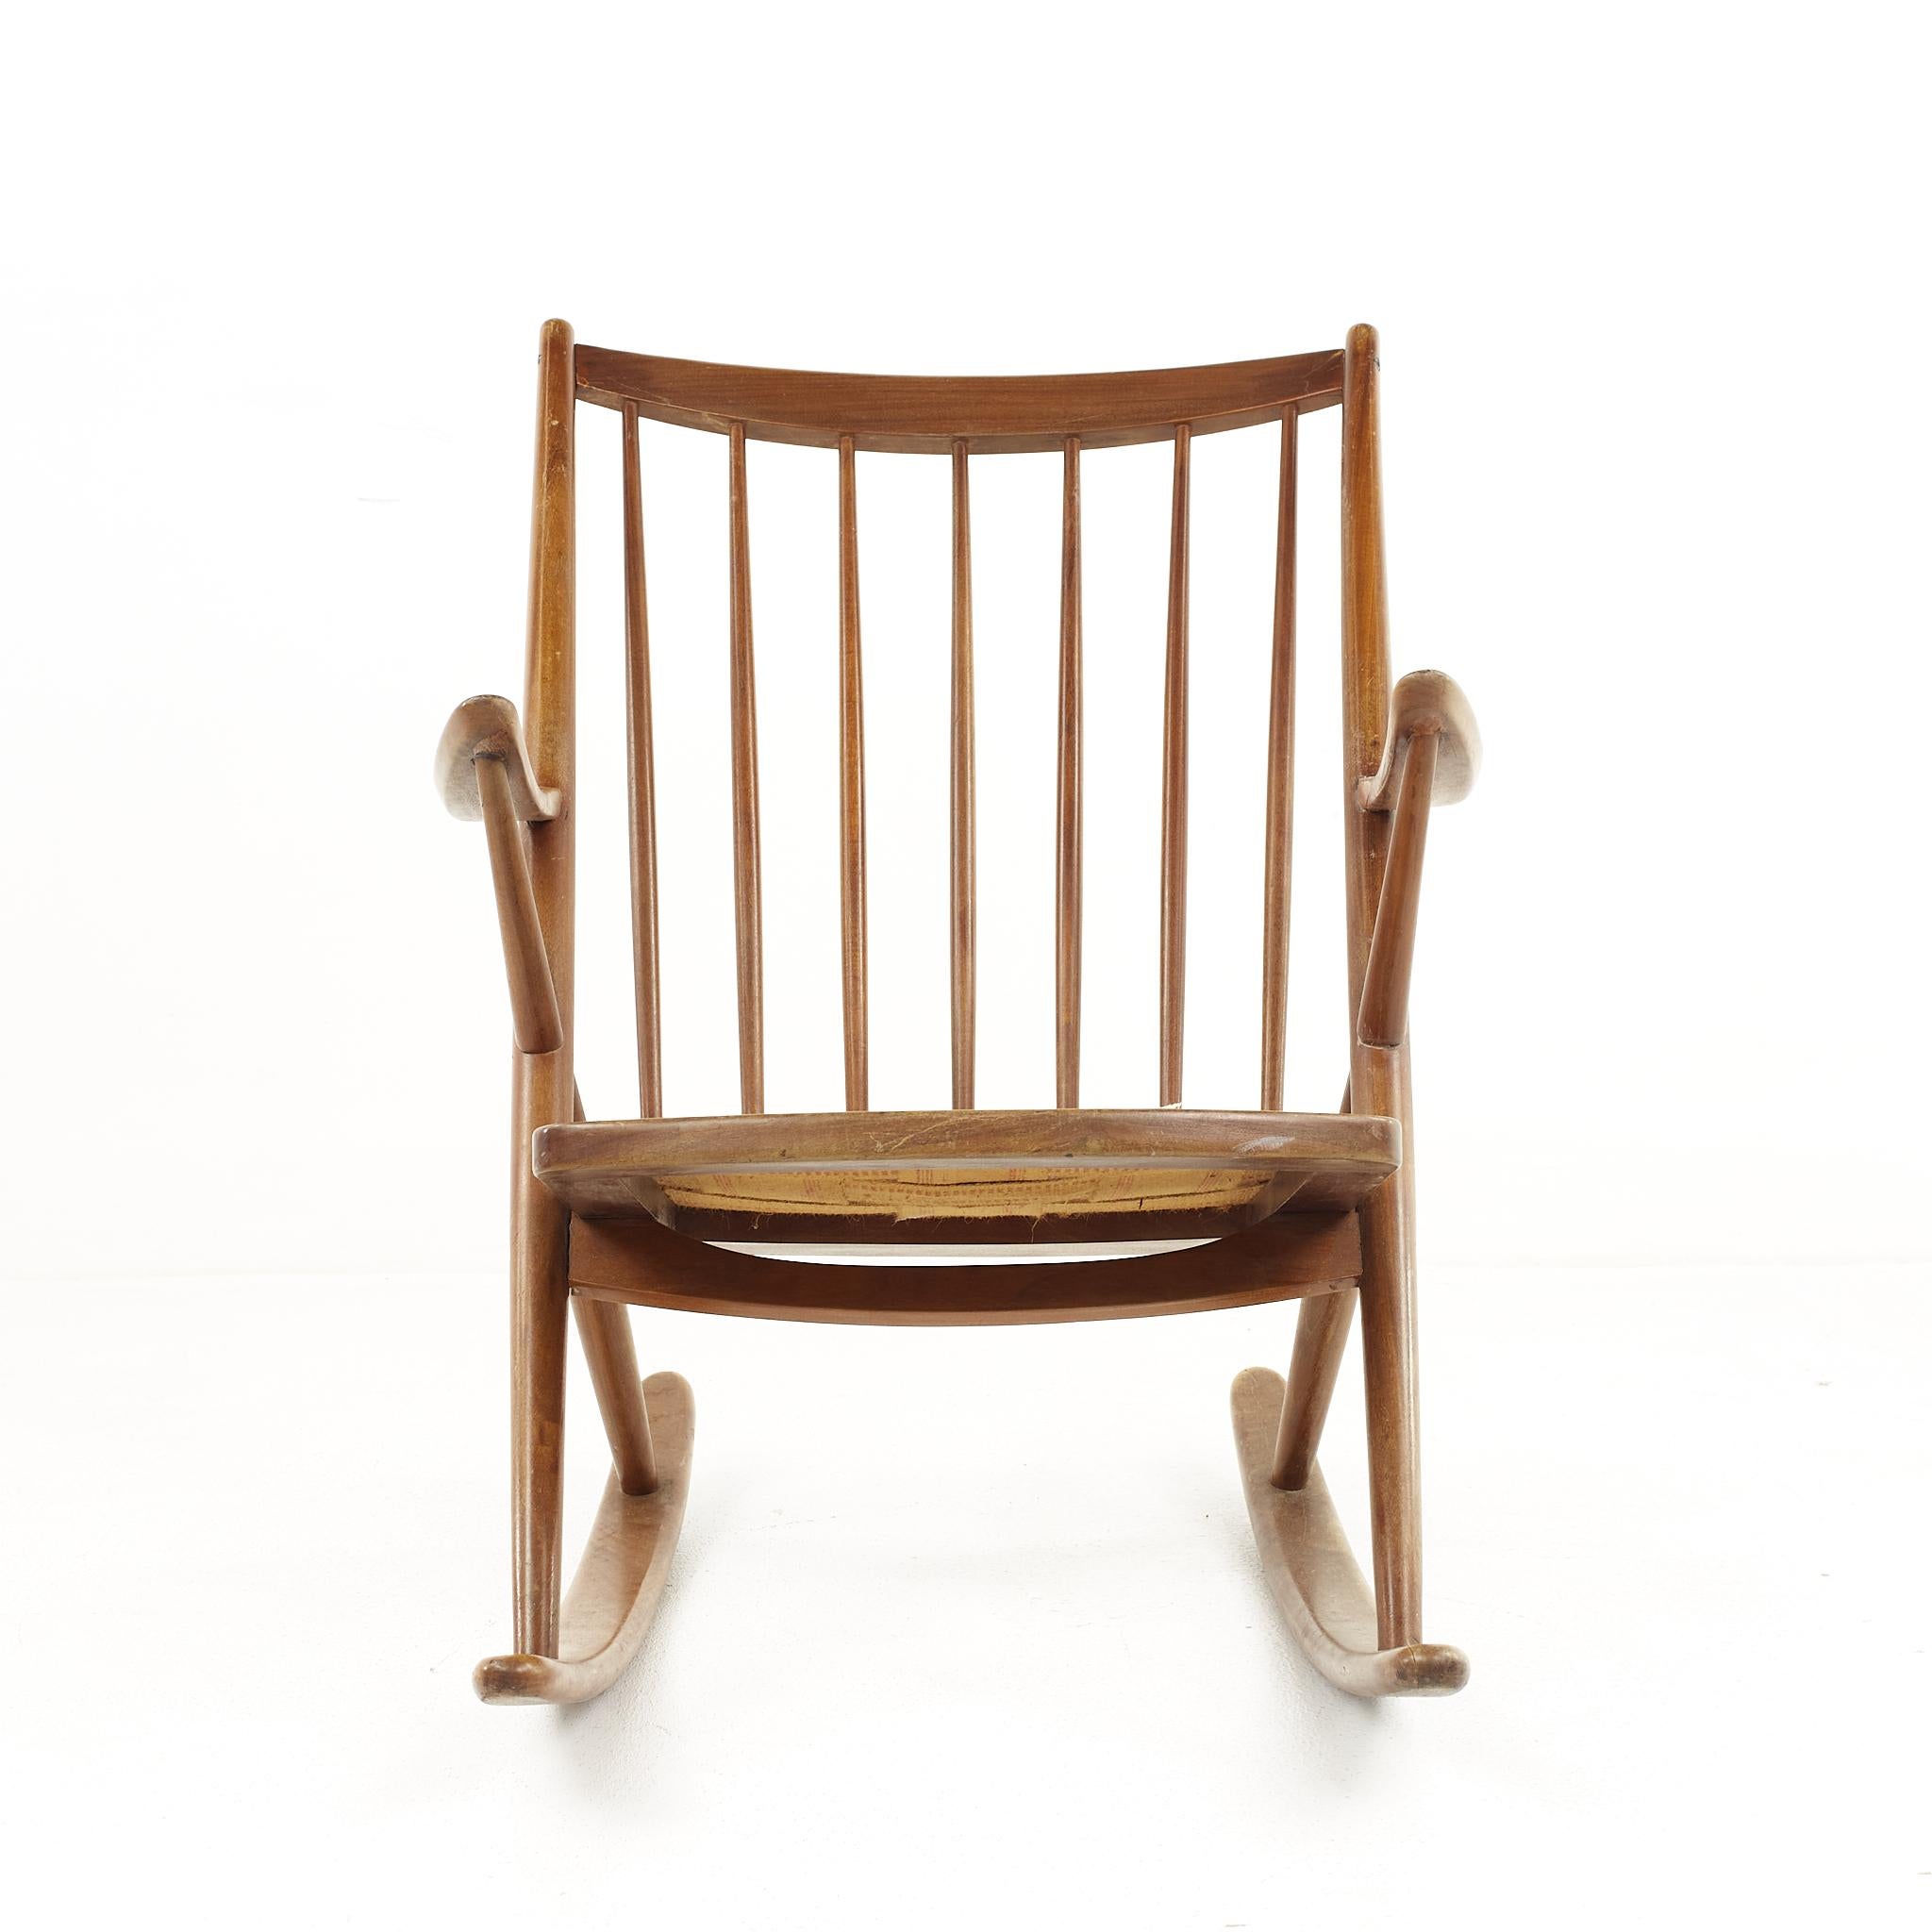 Frank Reenskaug for Bramin Mobler Model 182 mid century teak rocking chair

The chair measures: 26.25 wide x 32 deep x 34.25 inches high, with a seat height of 16 and arm height of 24.75 inches

All pieces of furniture can be had in what we call